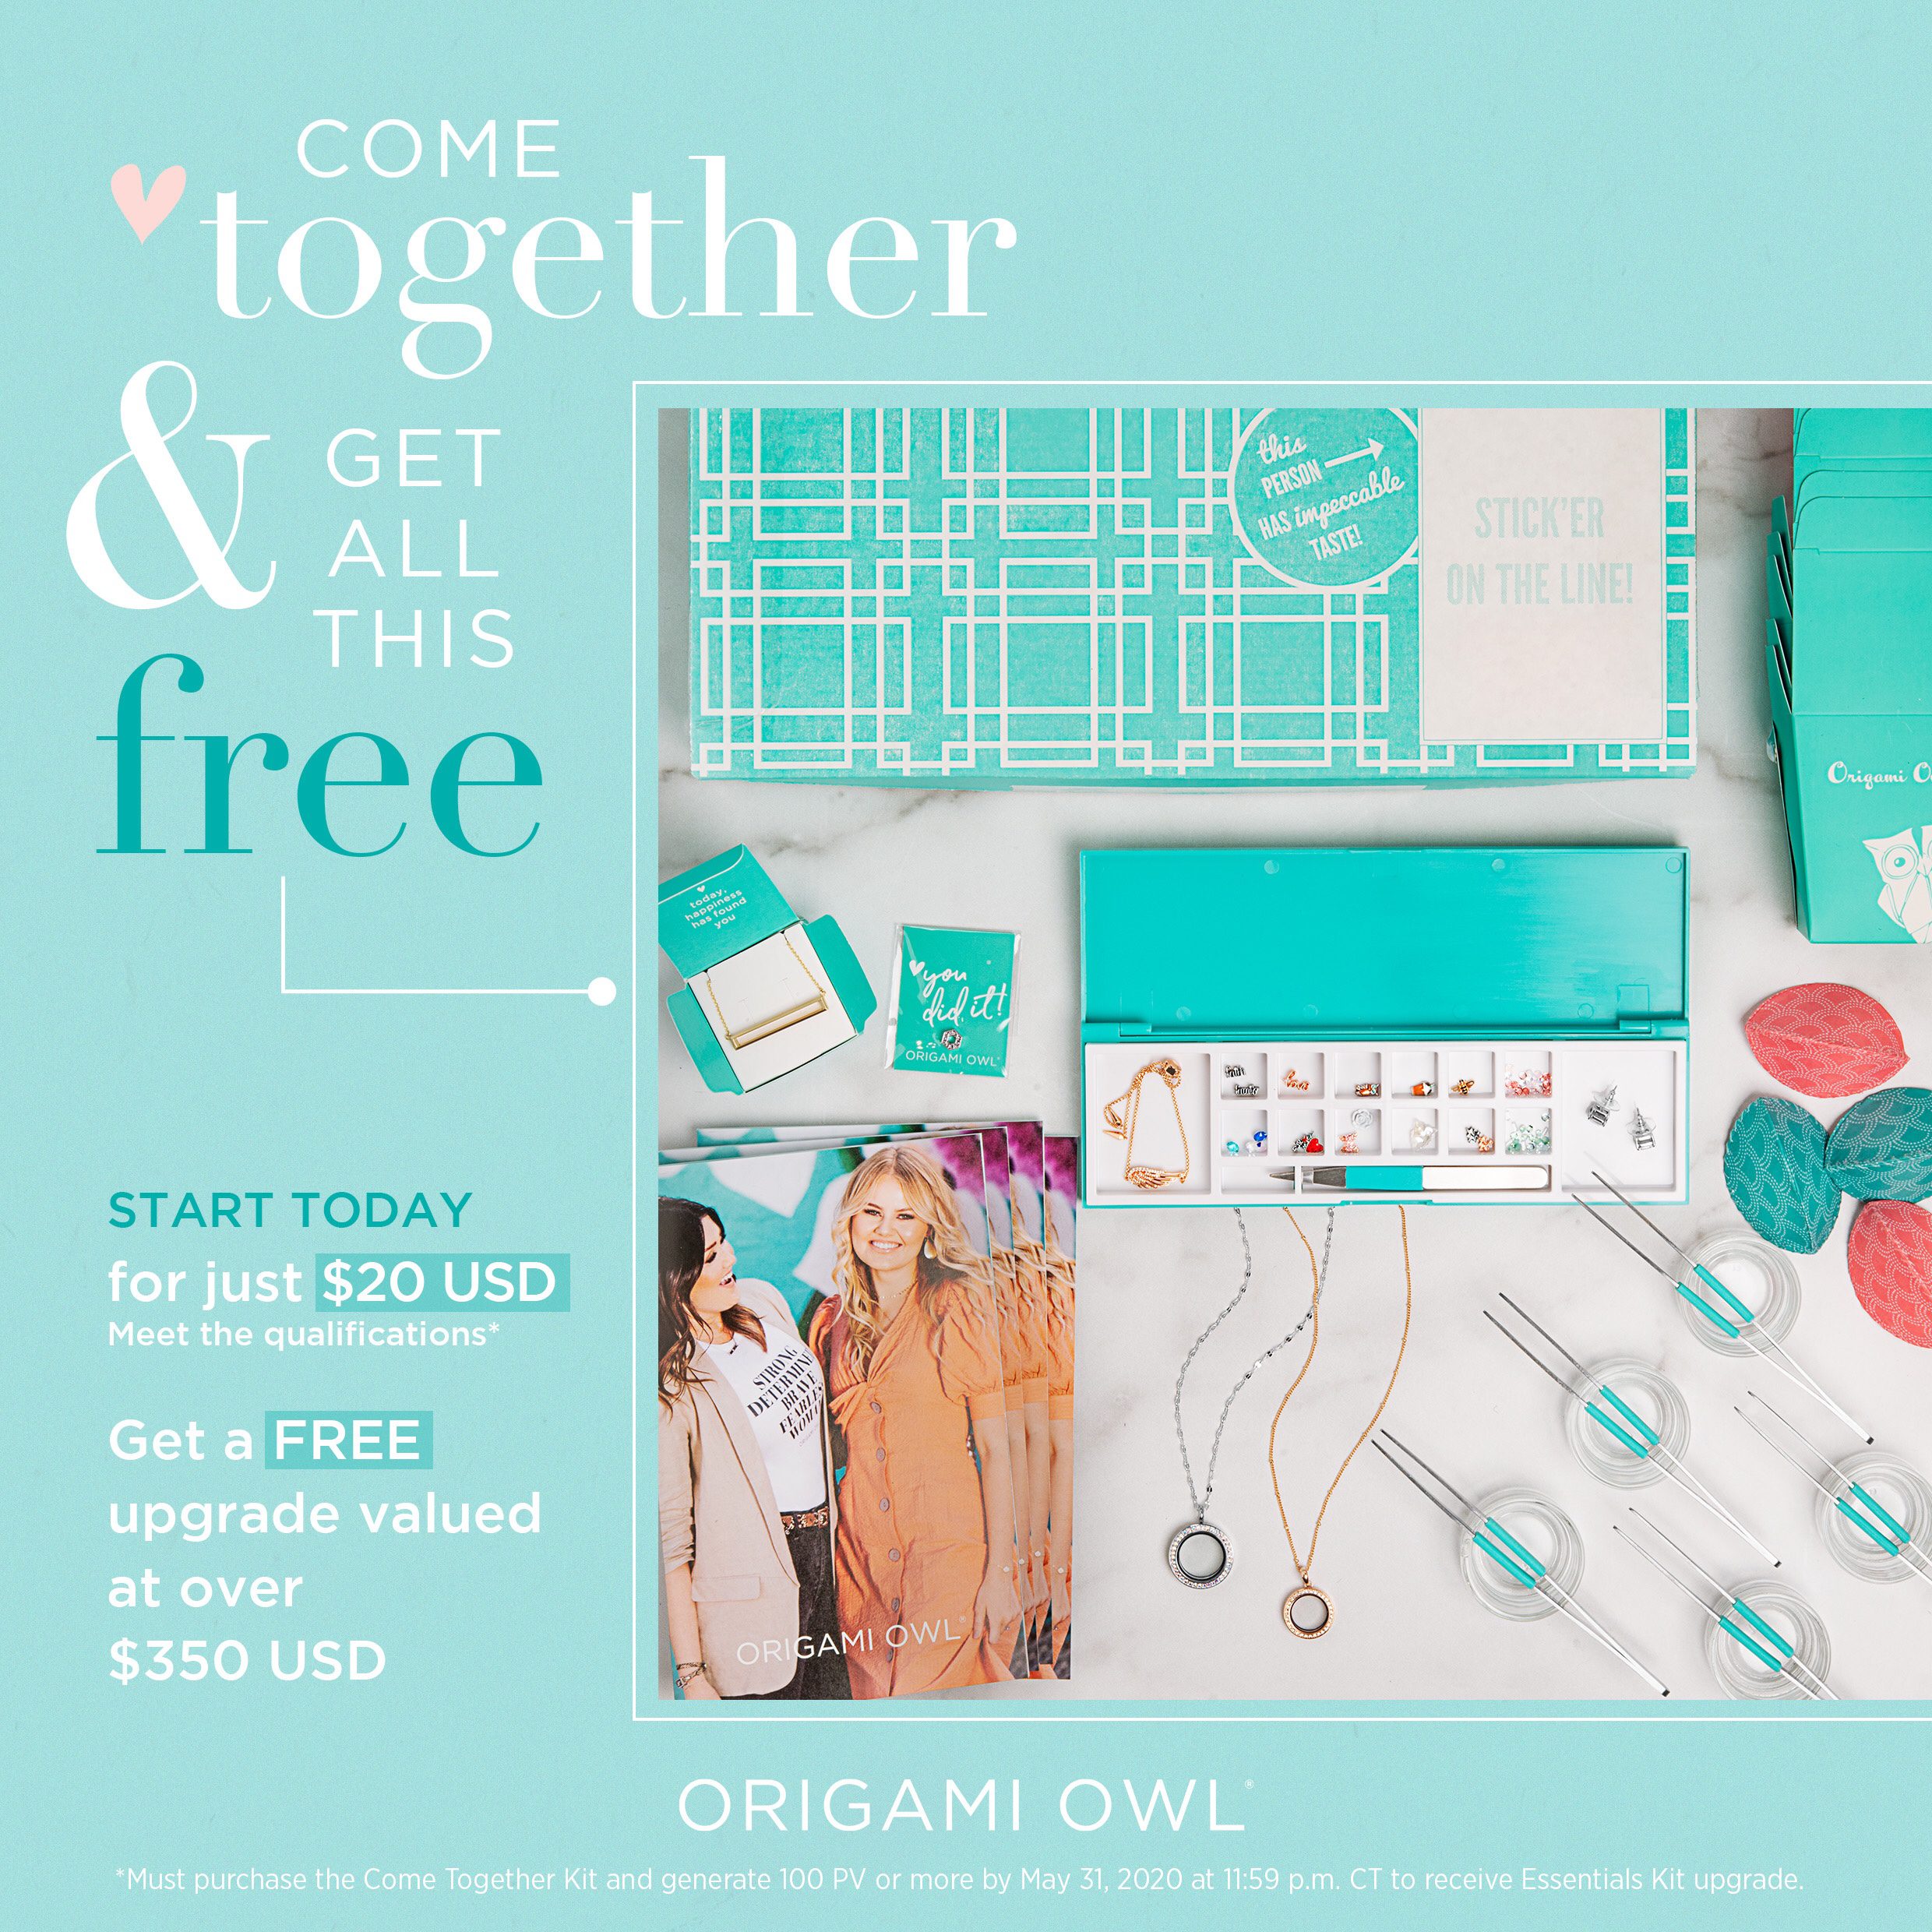 Origami Owl Jewelry Learn How To Grow Your Origami Owl Business